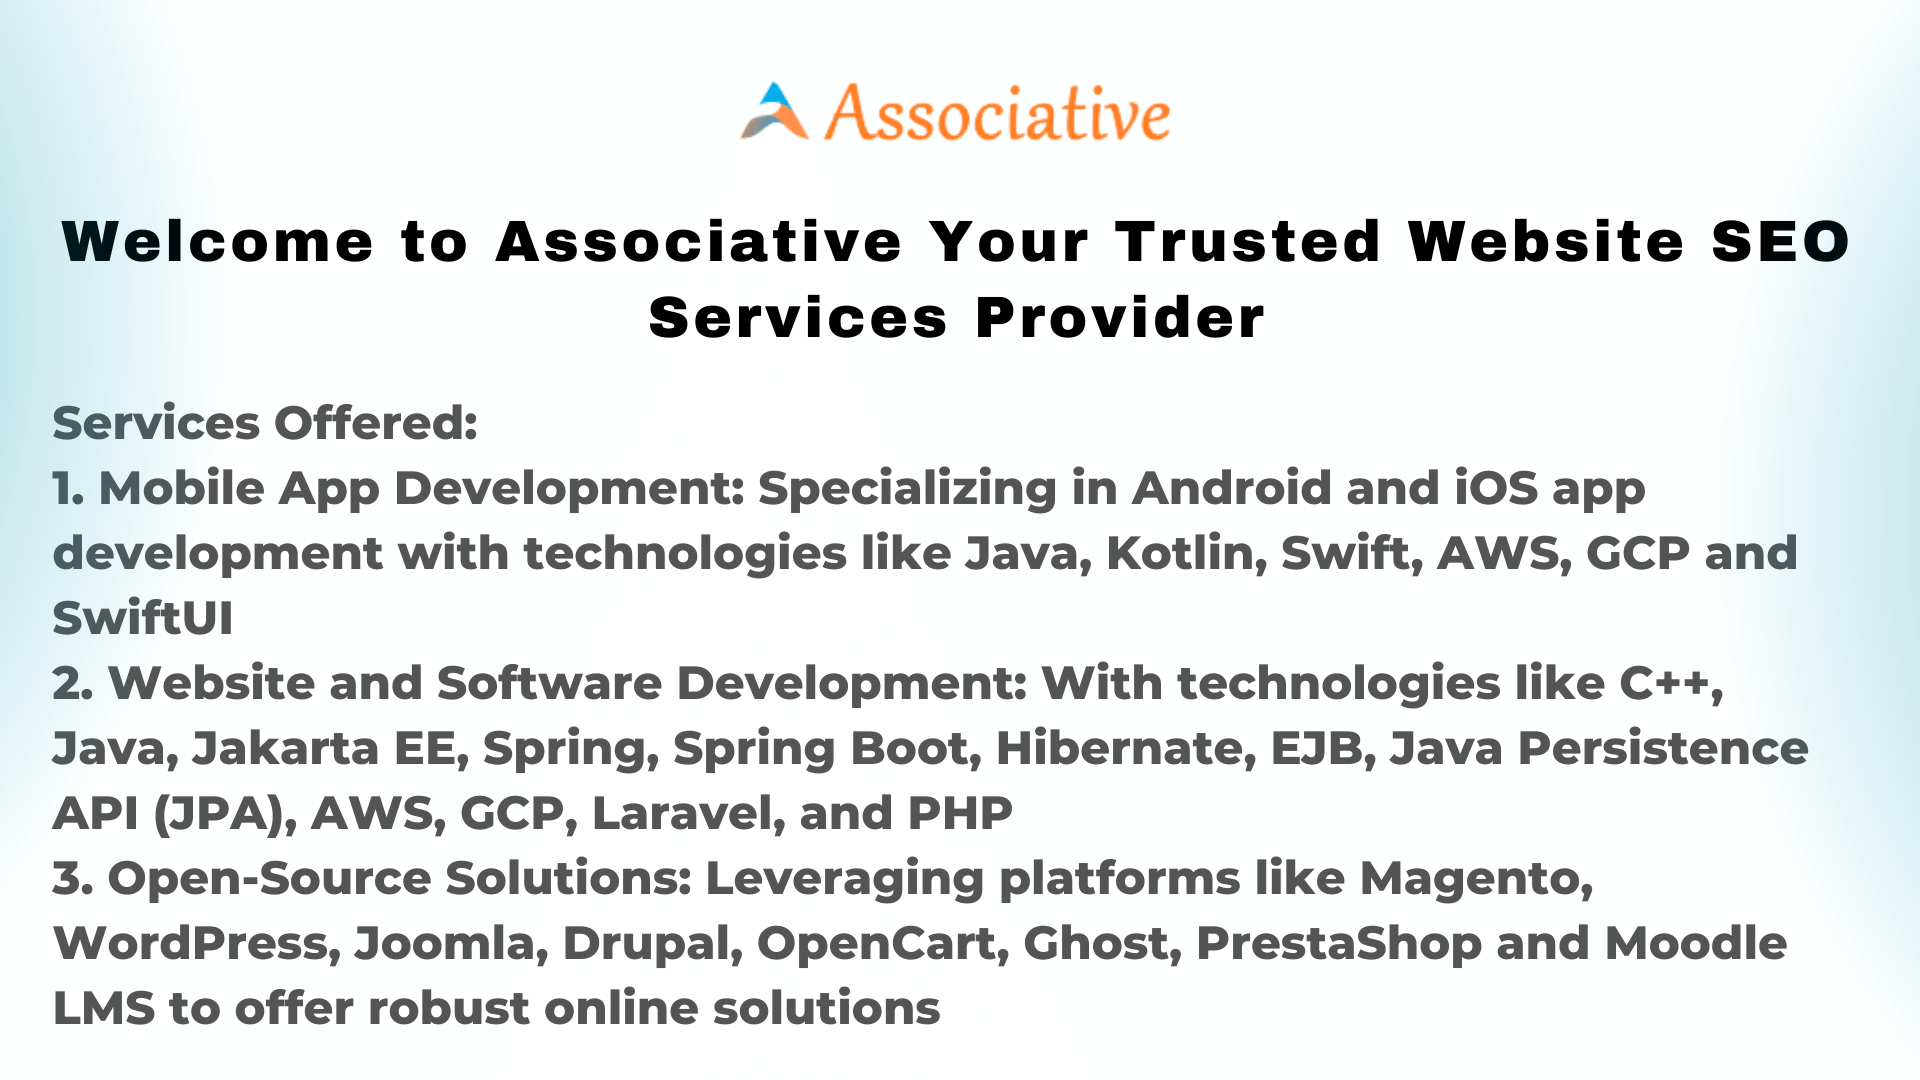 Welcome to Associative Your Trusted Website SEO Services Provider